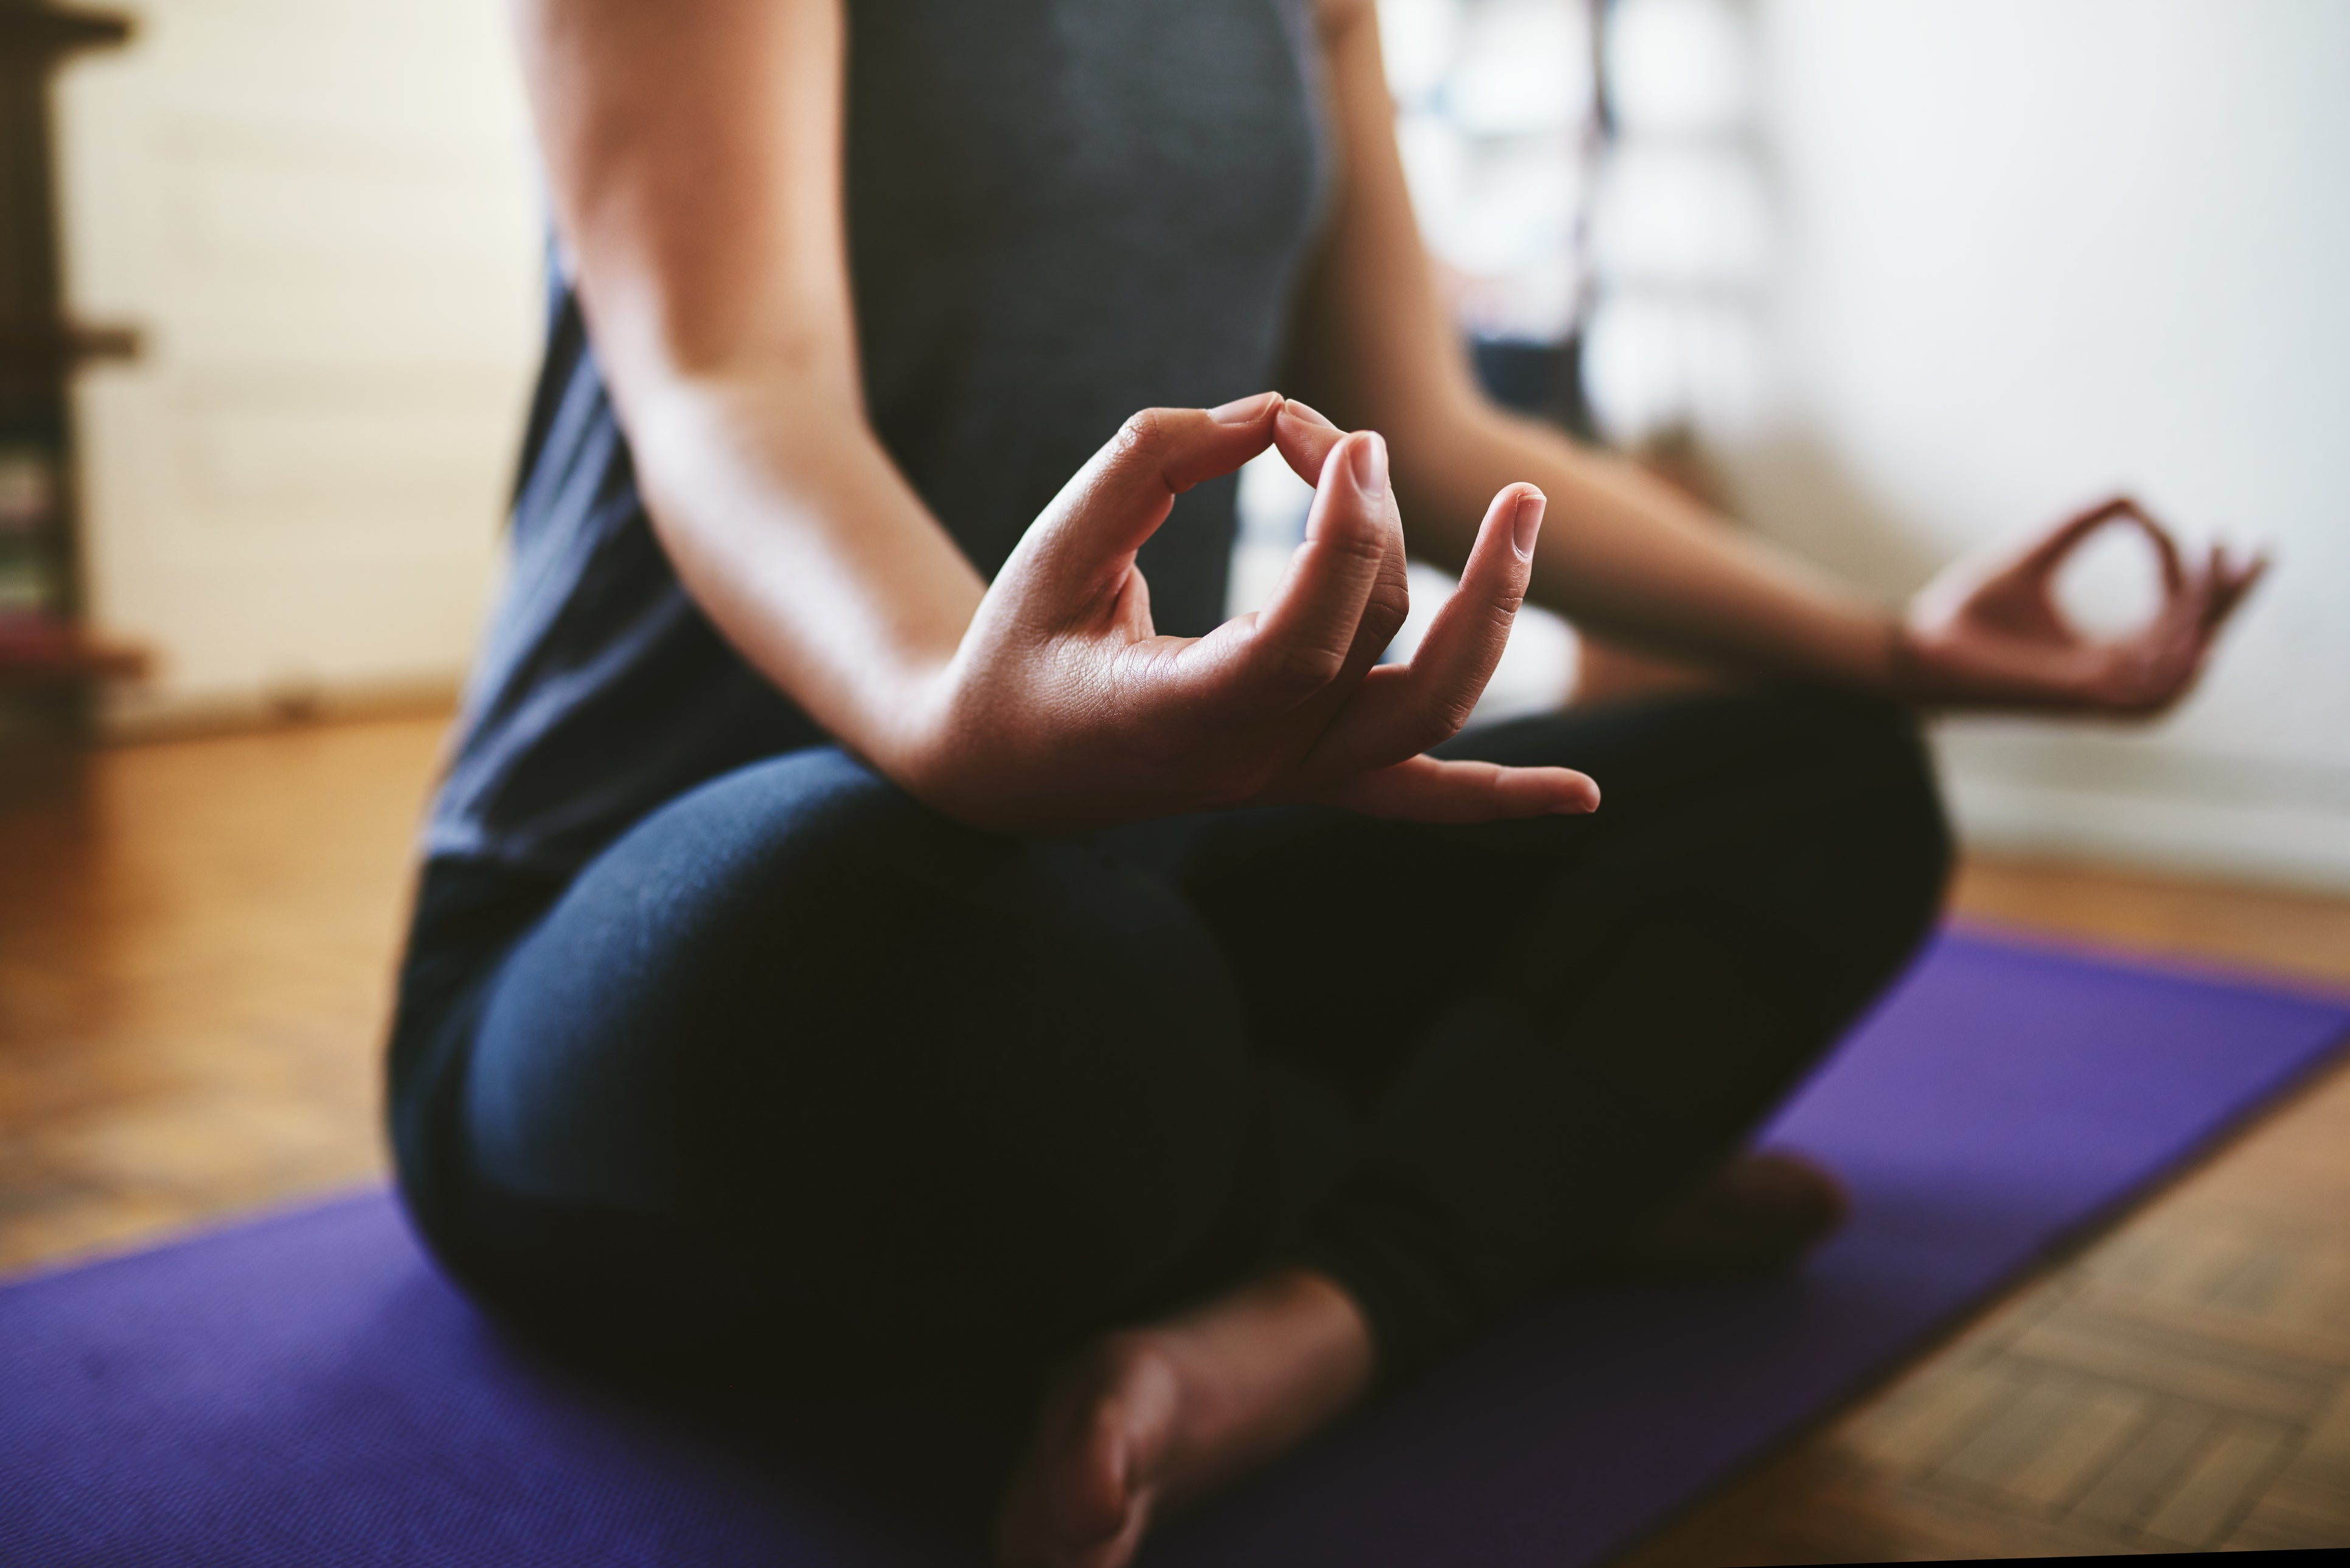 Hands On: Yoga Mudras to Sharpen Your Focus by Jessi Moore